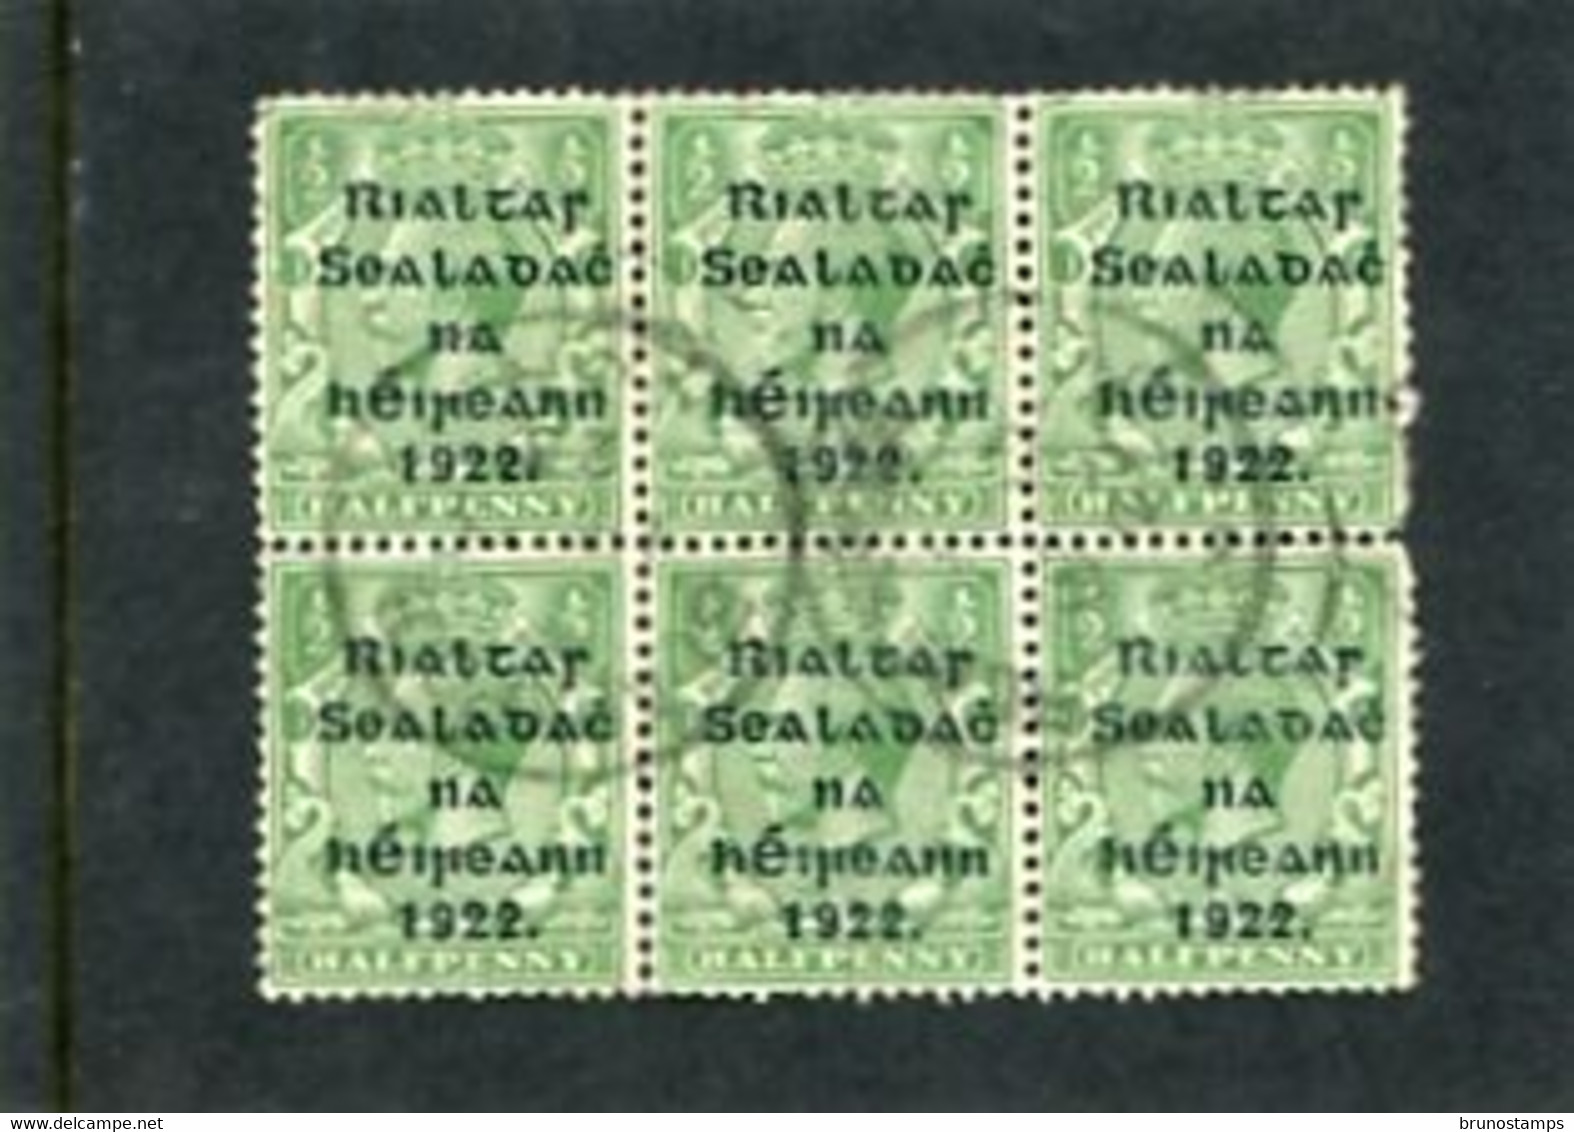 IRELAND/EIRE - 1922  1/2d. OVERPRINTED THOM  WIDER  DATE  BLOCK OF 6   FINE  USED  SG 47 - Used Stamps